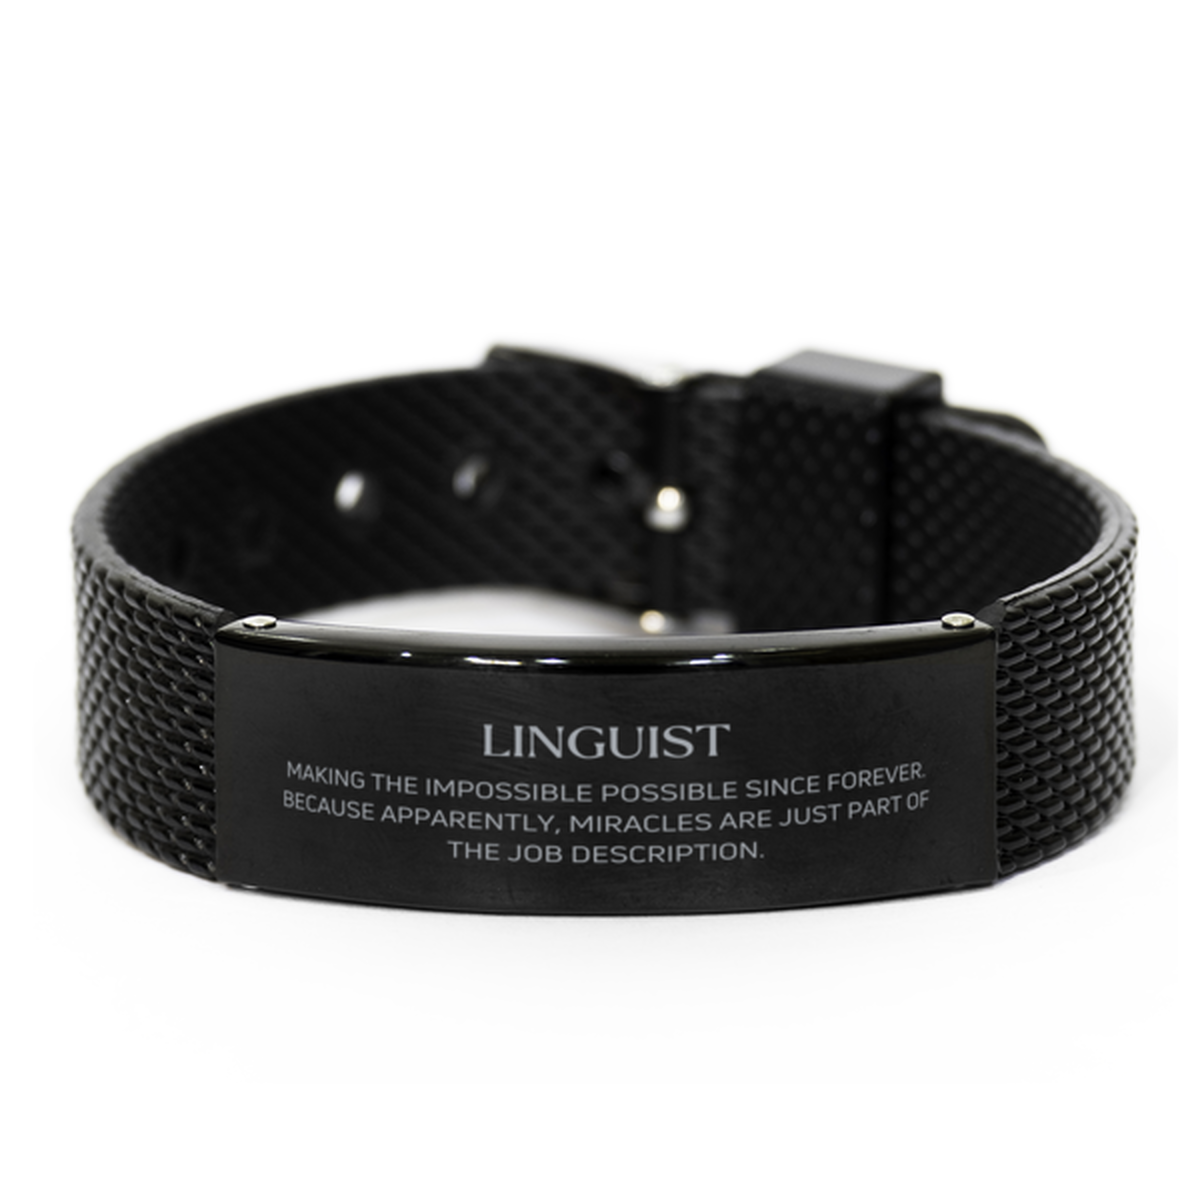 Funny Linguist Gifts, Miracles are just part of the job description, Inspirational Birthday Black Shark Mesh Bracelet For Linguist, Men, Women, Coworkers, Friends, Boss